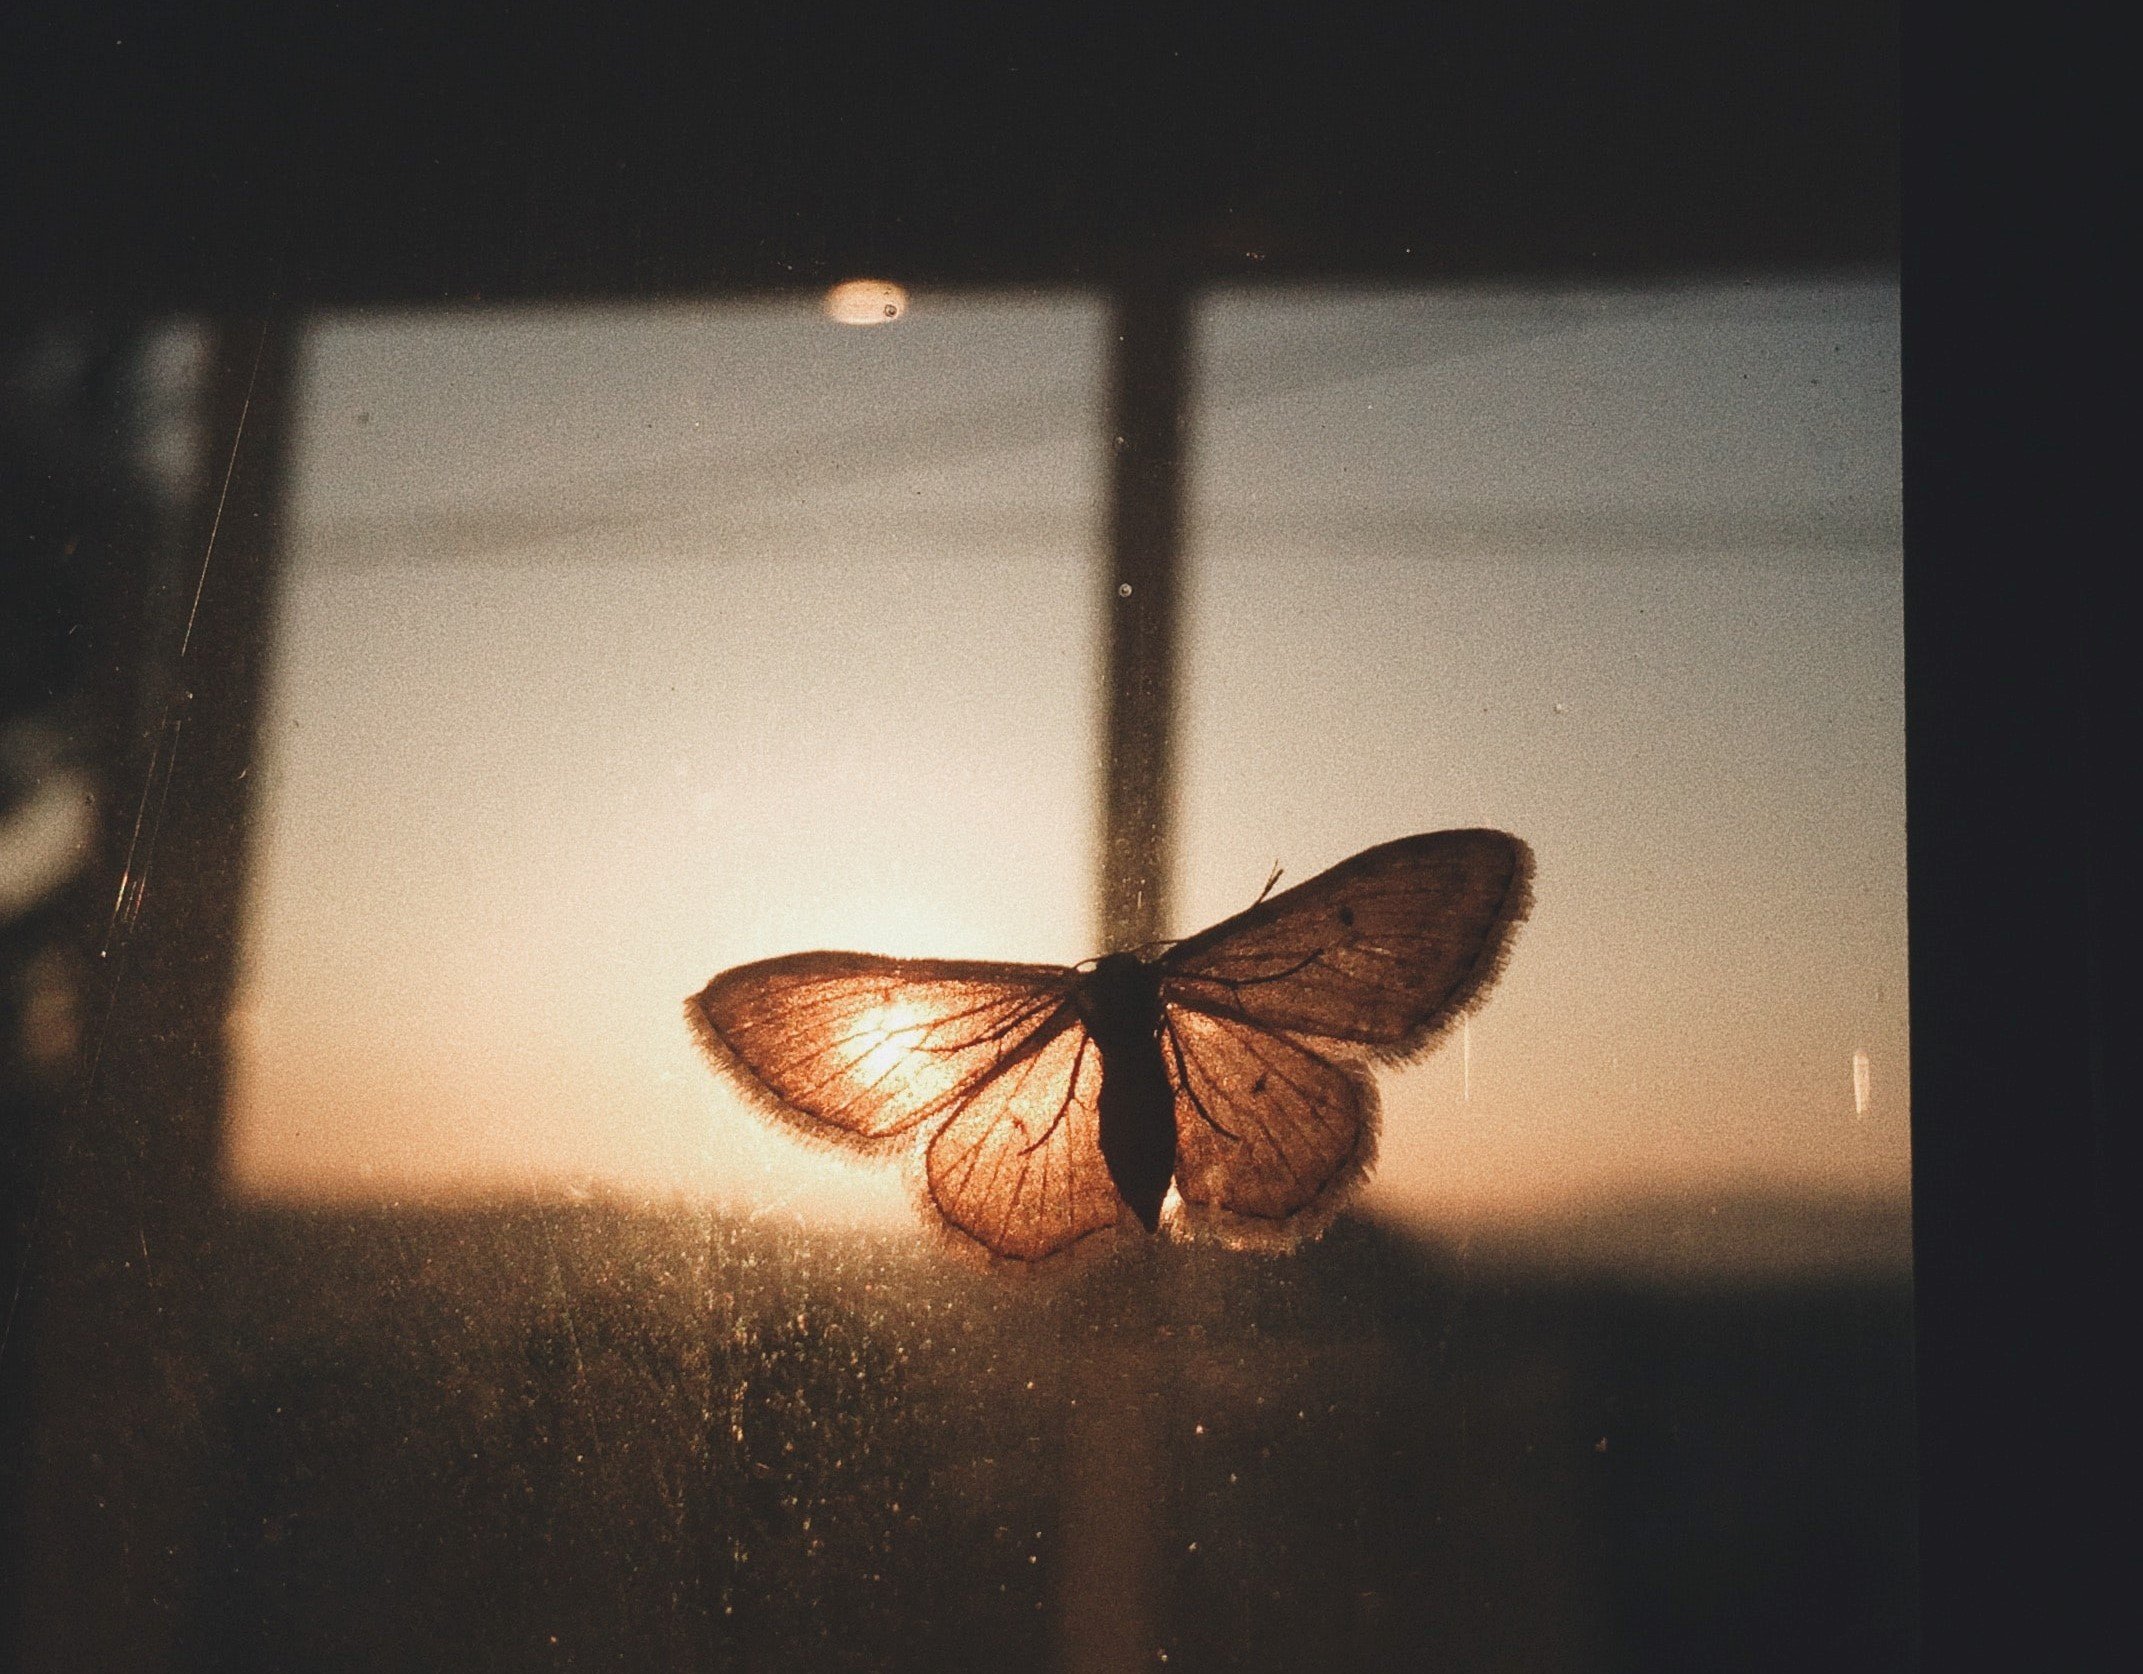 Man claims he saw a huge moth on a window before his dear aunt's passing | Photo: Unsplash